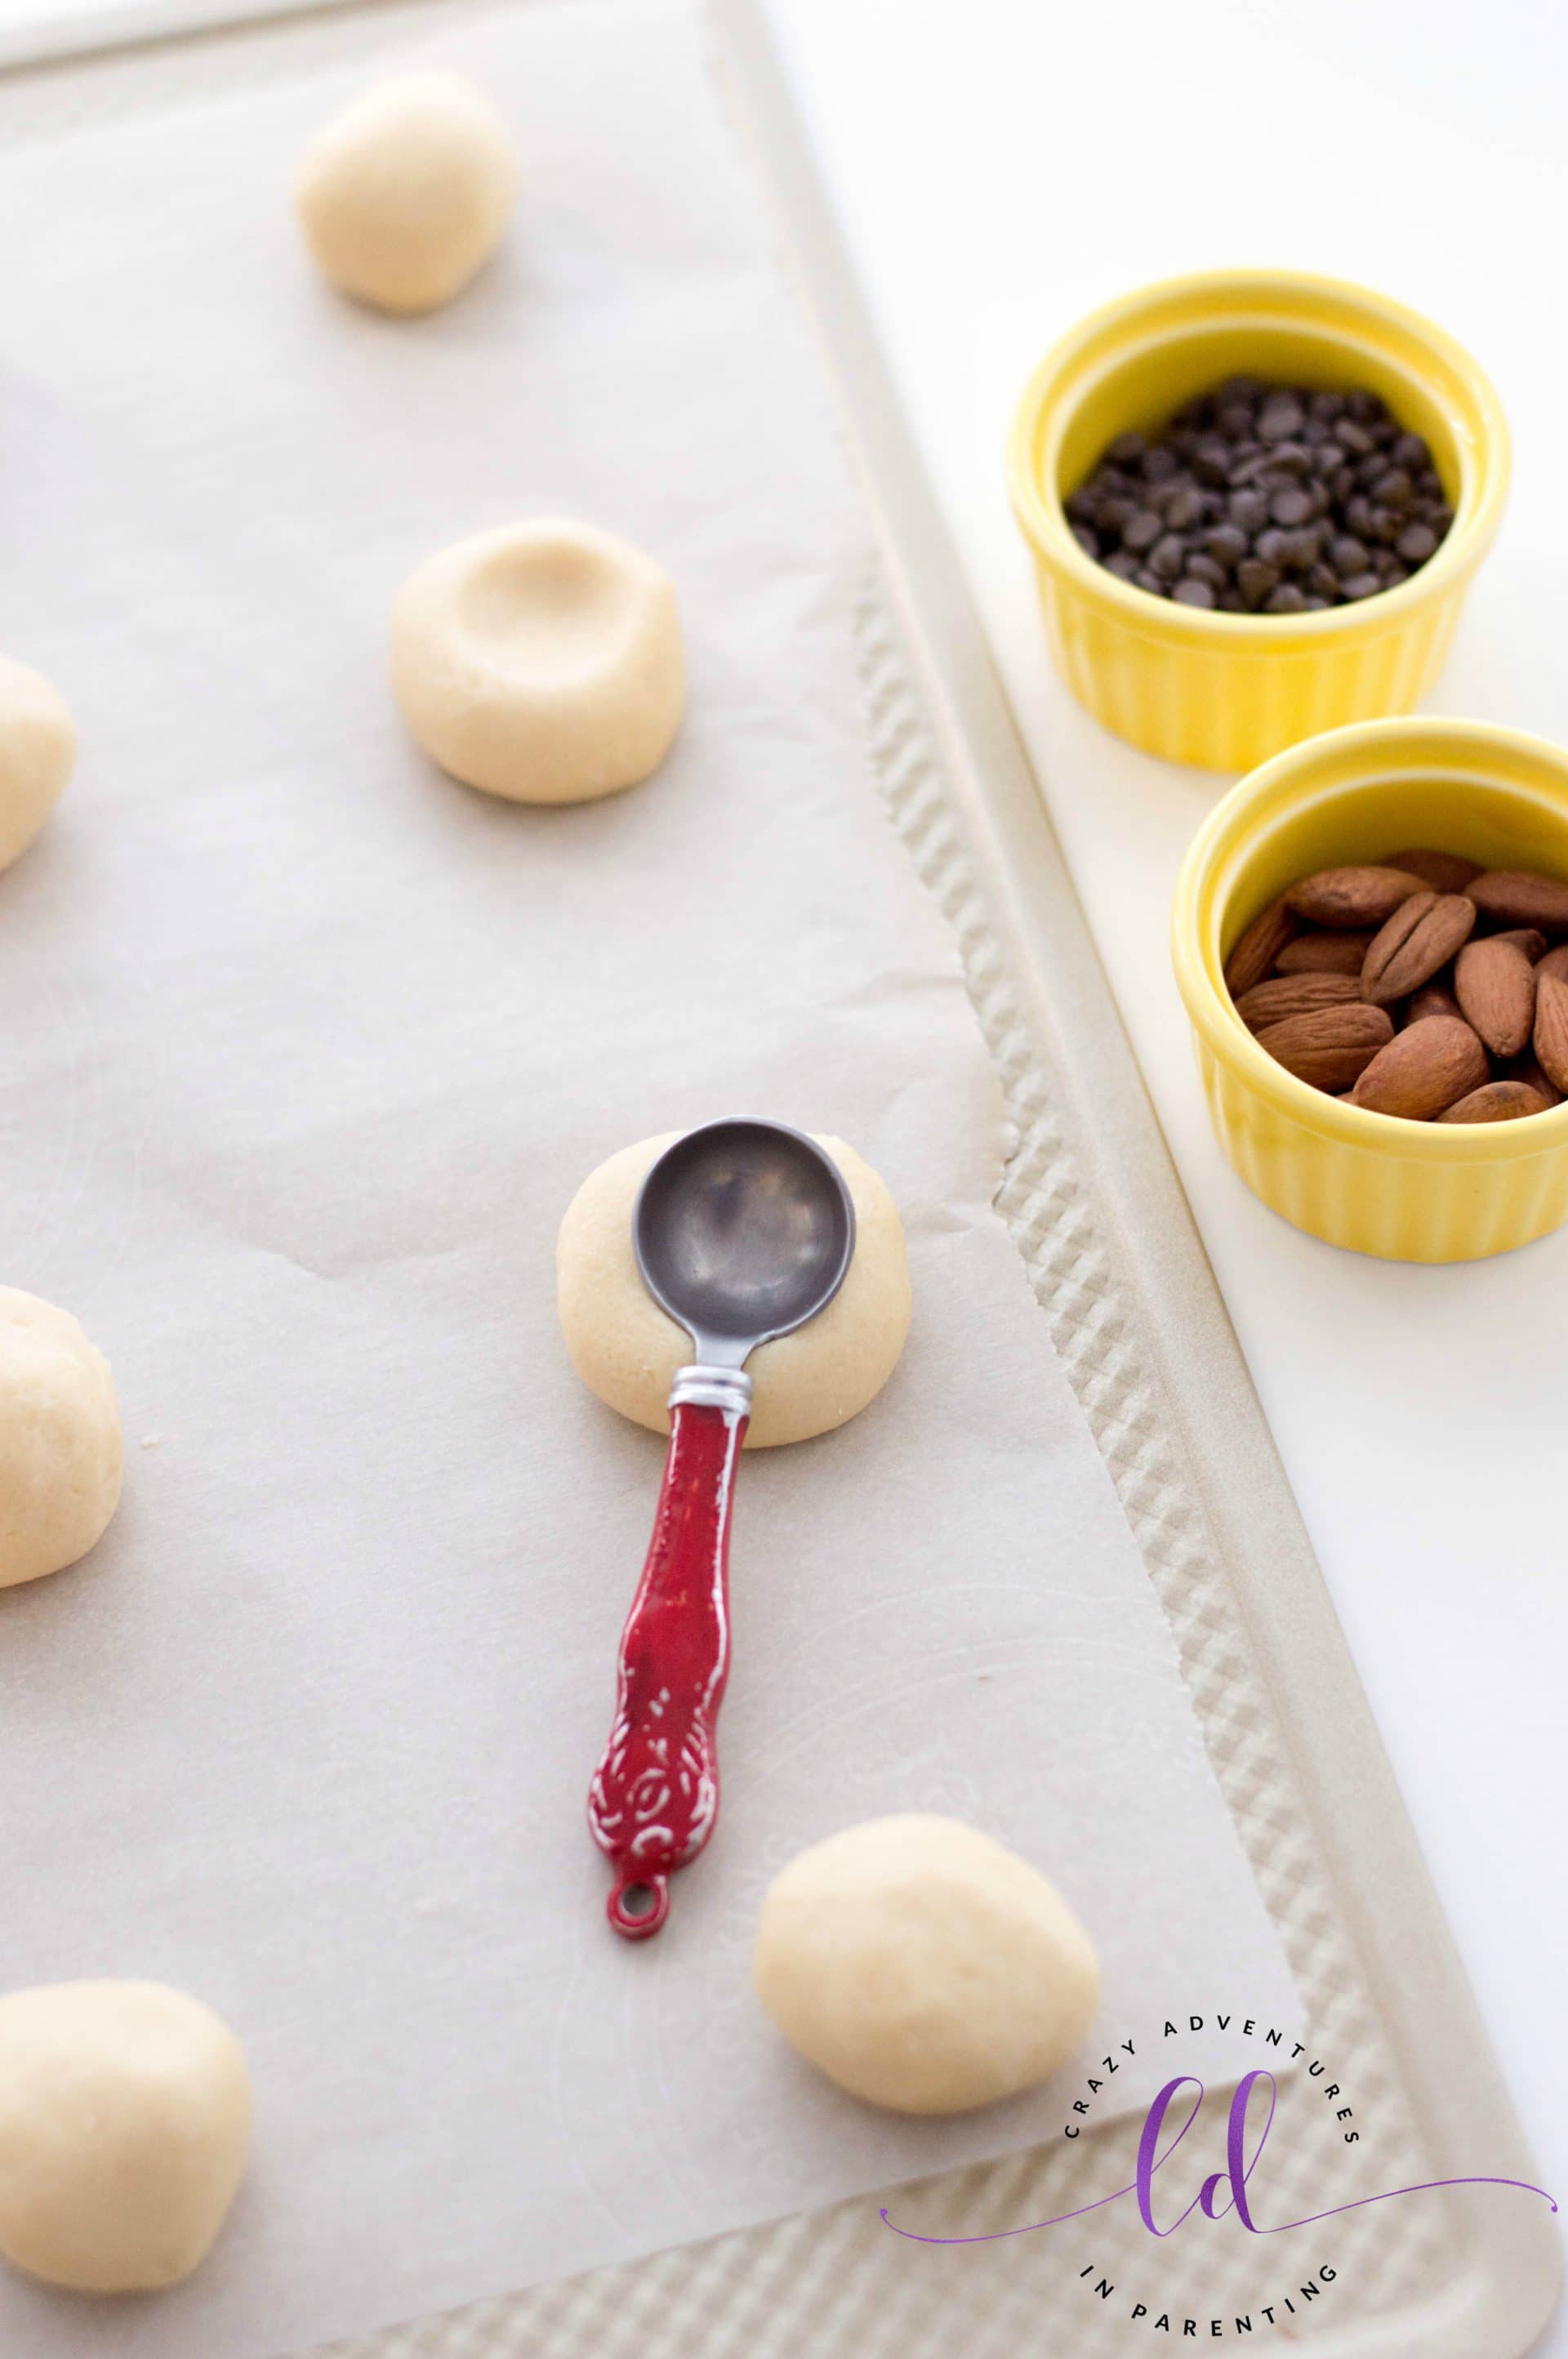 Create Indent for Chocolate Almond Thumbprint Cookies